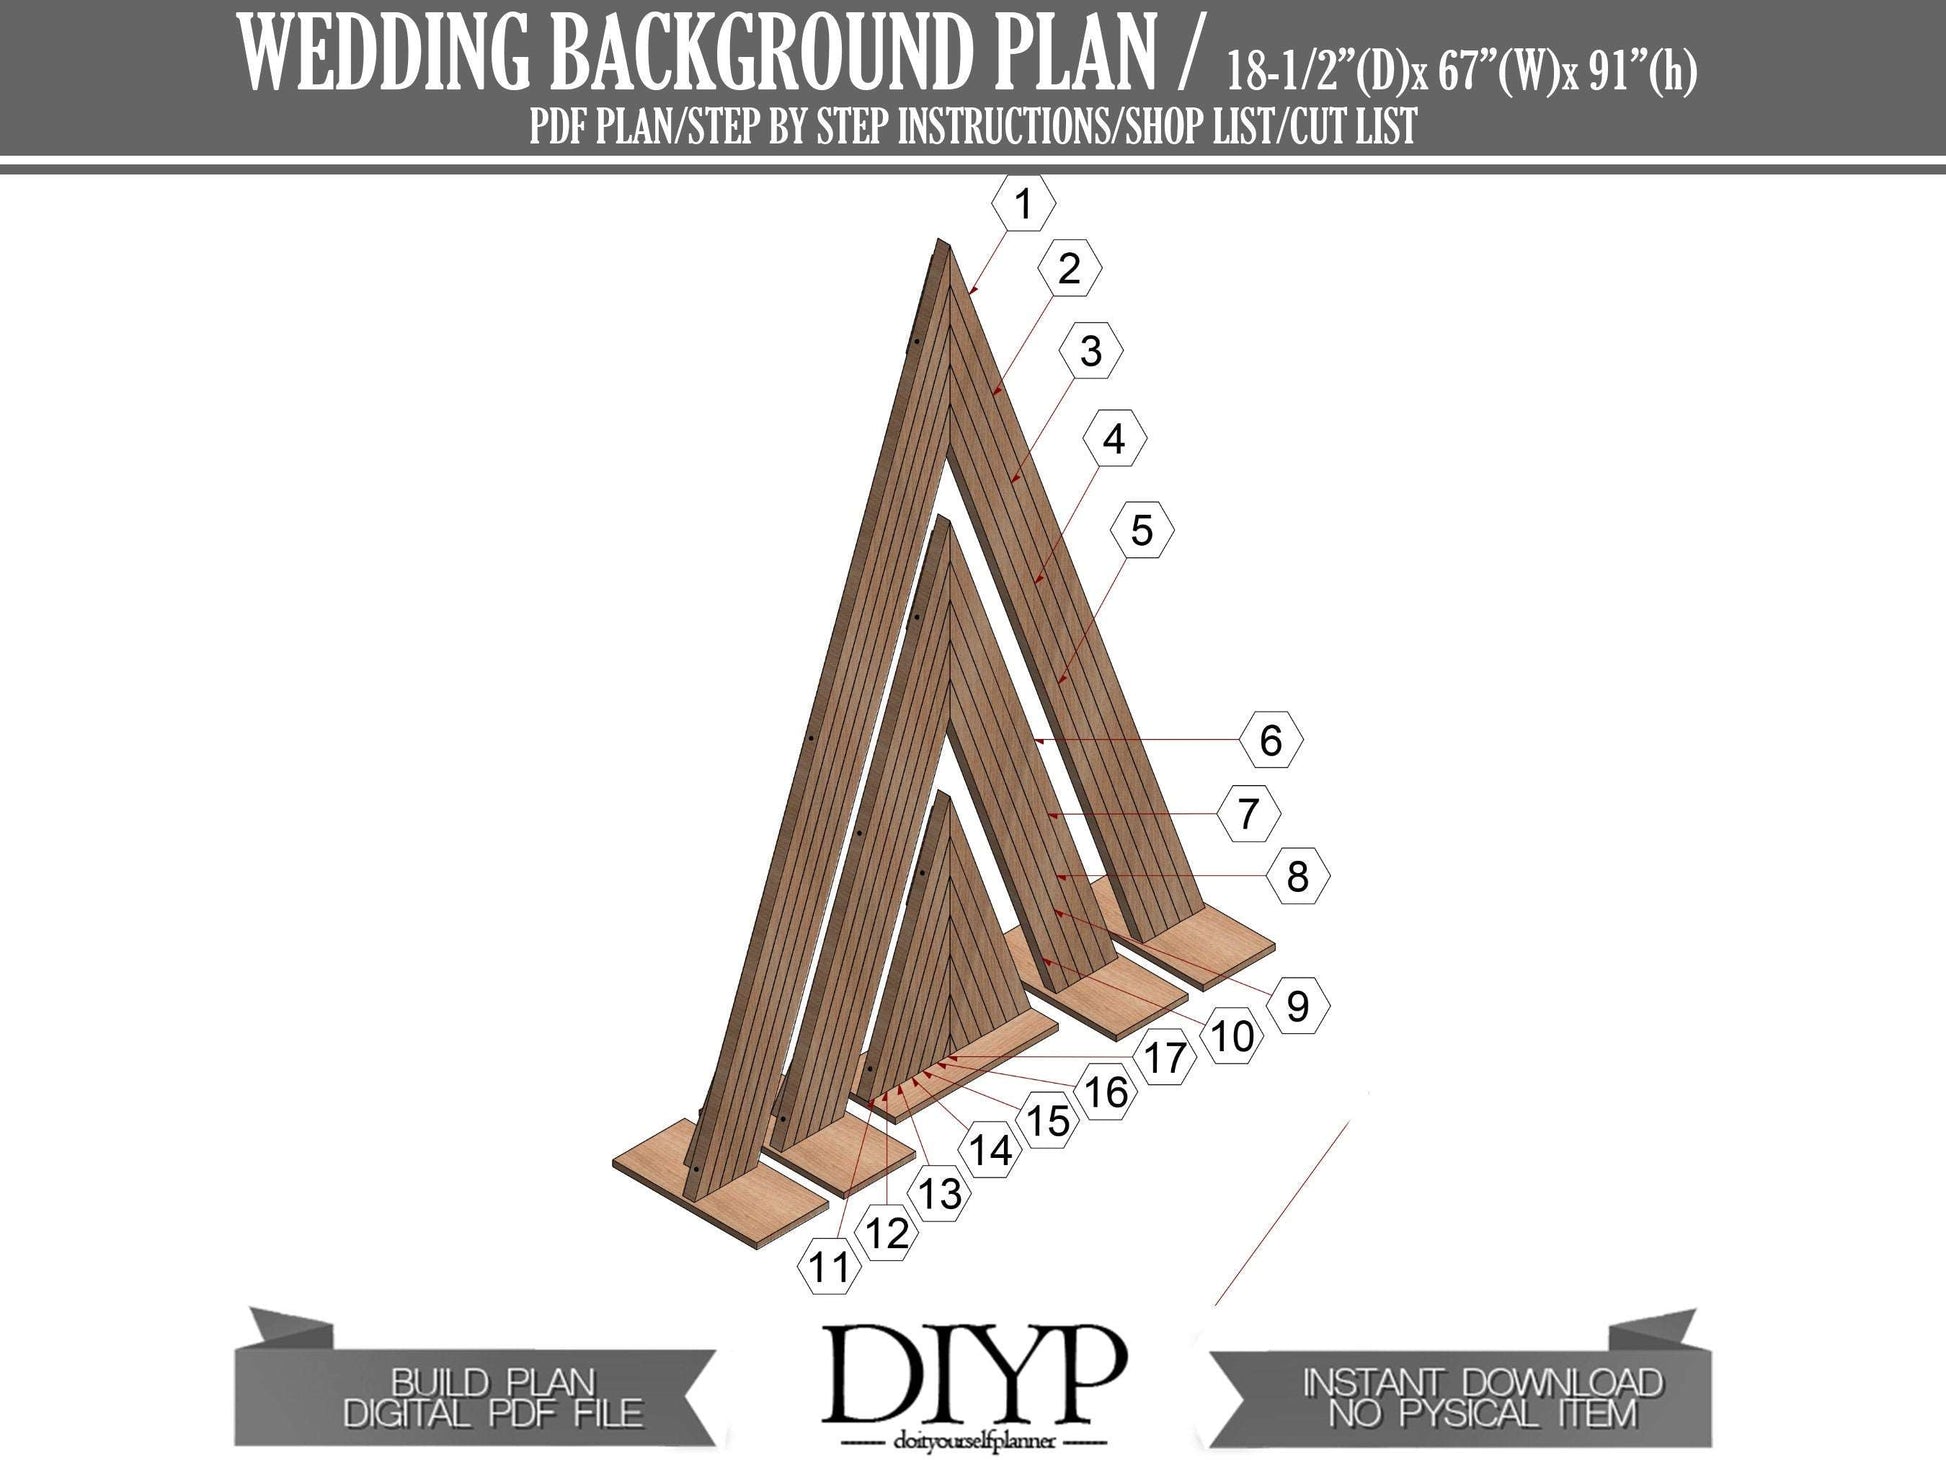 Wedding ideas - Wedding Decoration for photography - Build Instructions plans for wedding arch